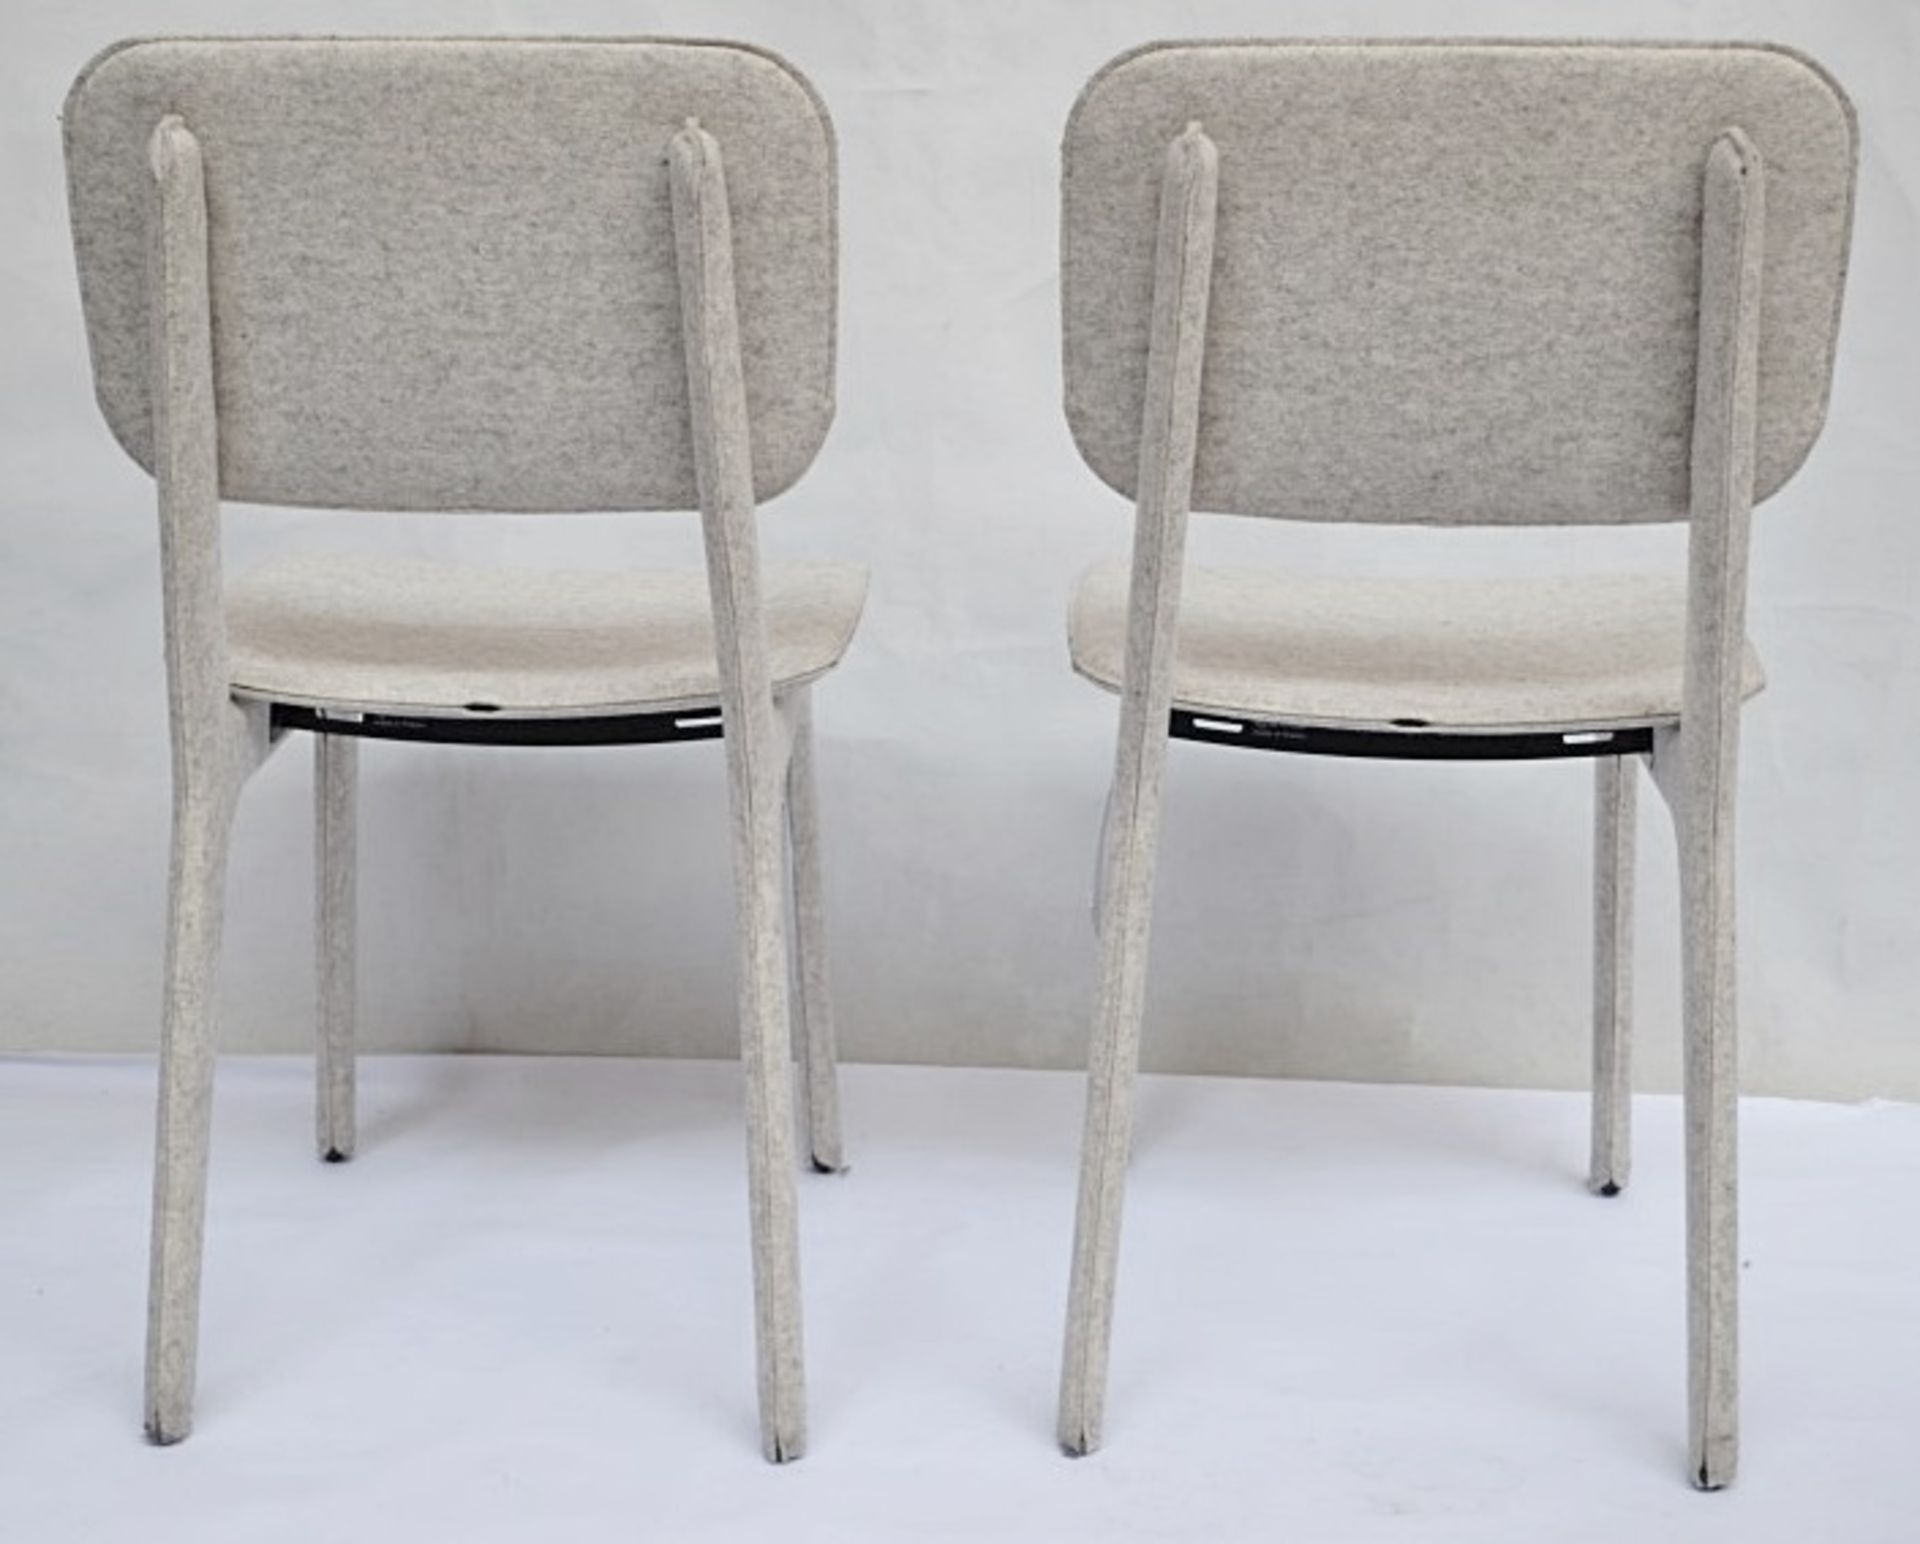 A Pair Of LIGNE ROSET Feutre Nacre "FELT" Dining Chairs In Cream/Grey - Dimensions: H87 x 46 x 46cm, - Image 7 of 8